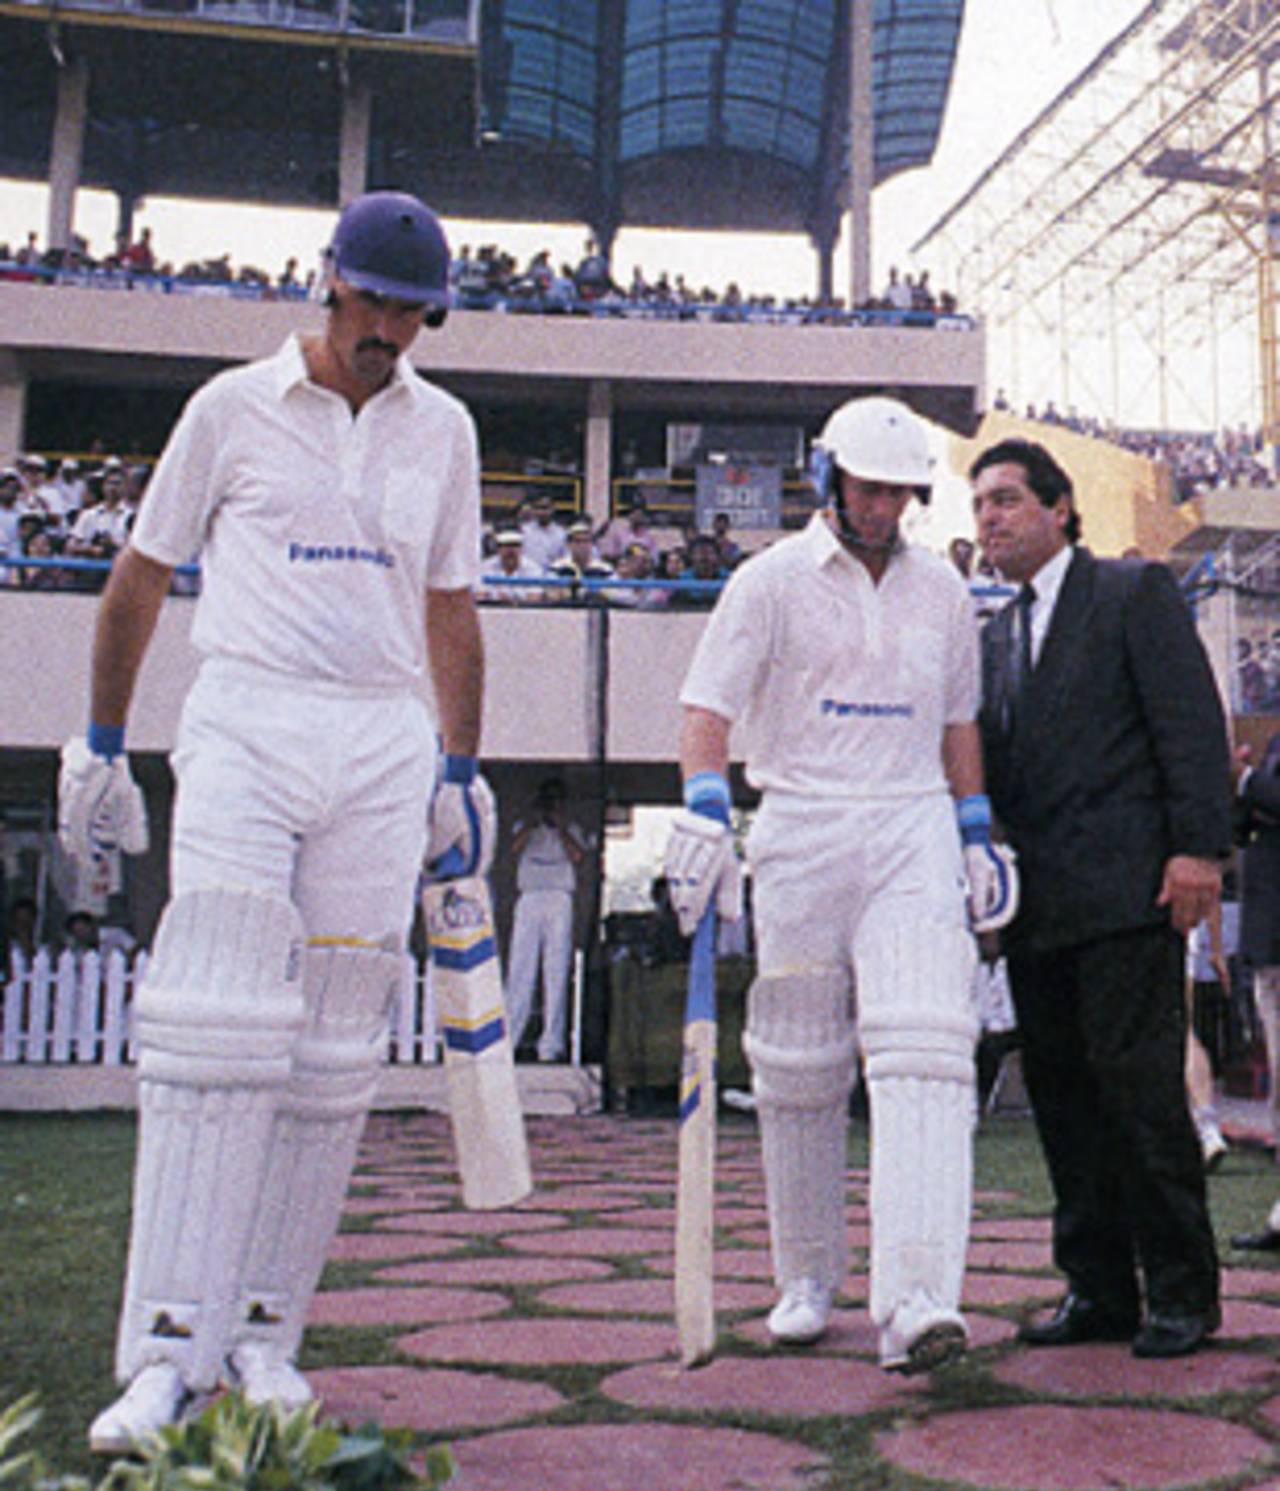 Jimmy Cook and Andrew Hudson walk out to open the innings, India v South Africa, 1st ODI, Calcutta, November 10, 1991